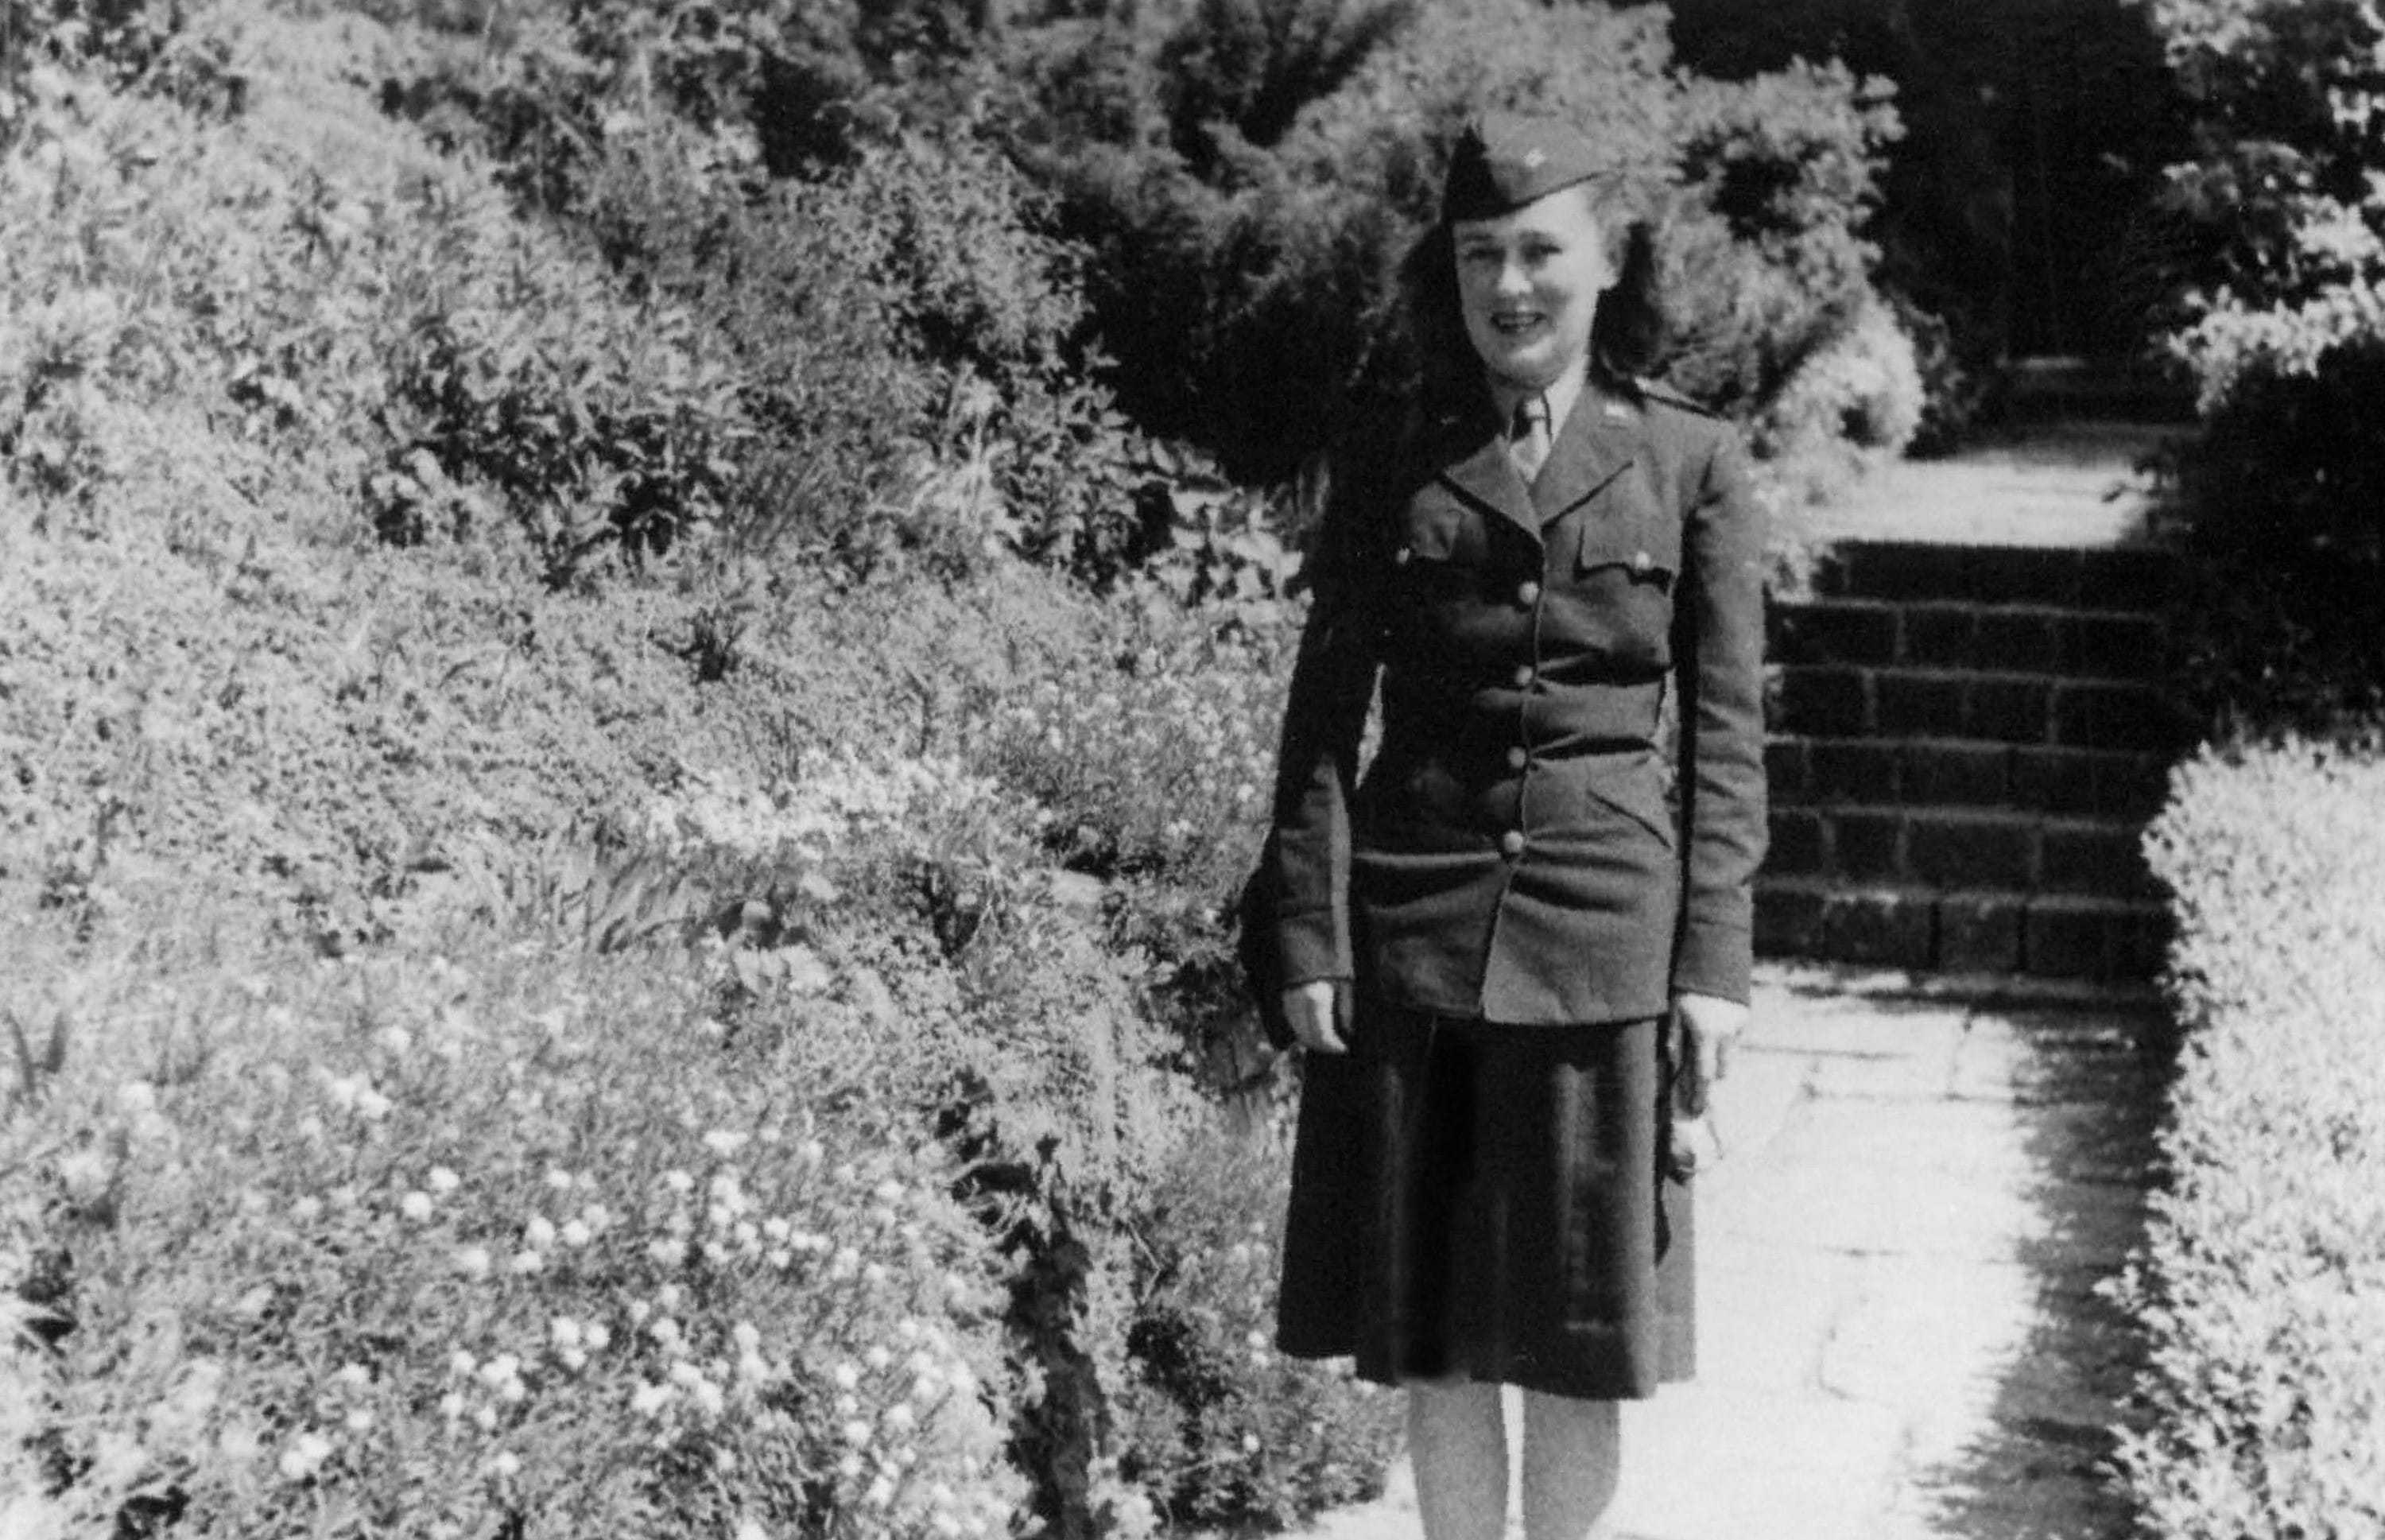 A black and white photograph of Burrell in uniform standing on a path by bushes.